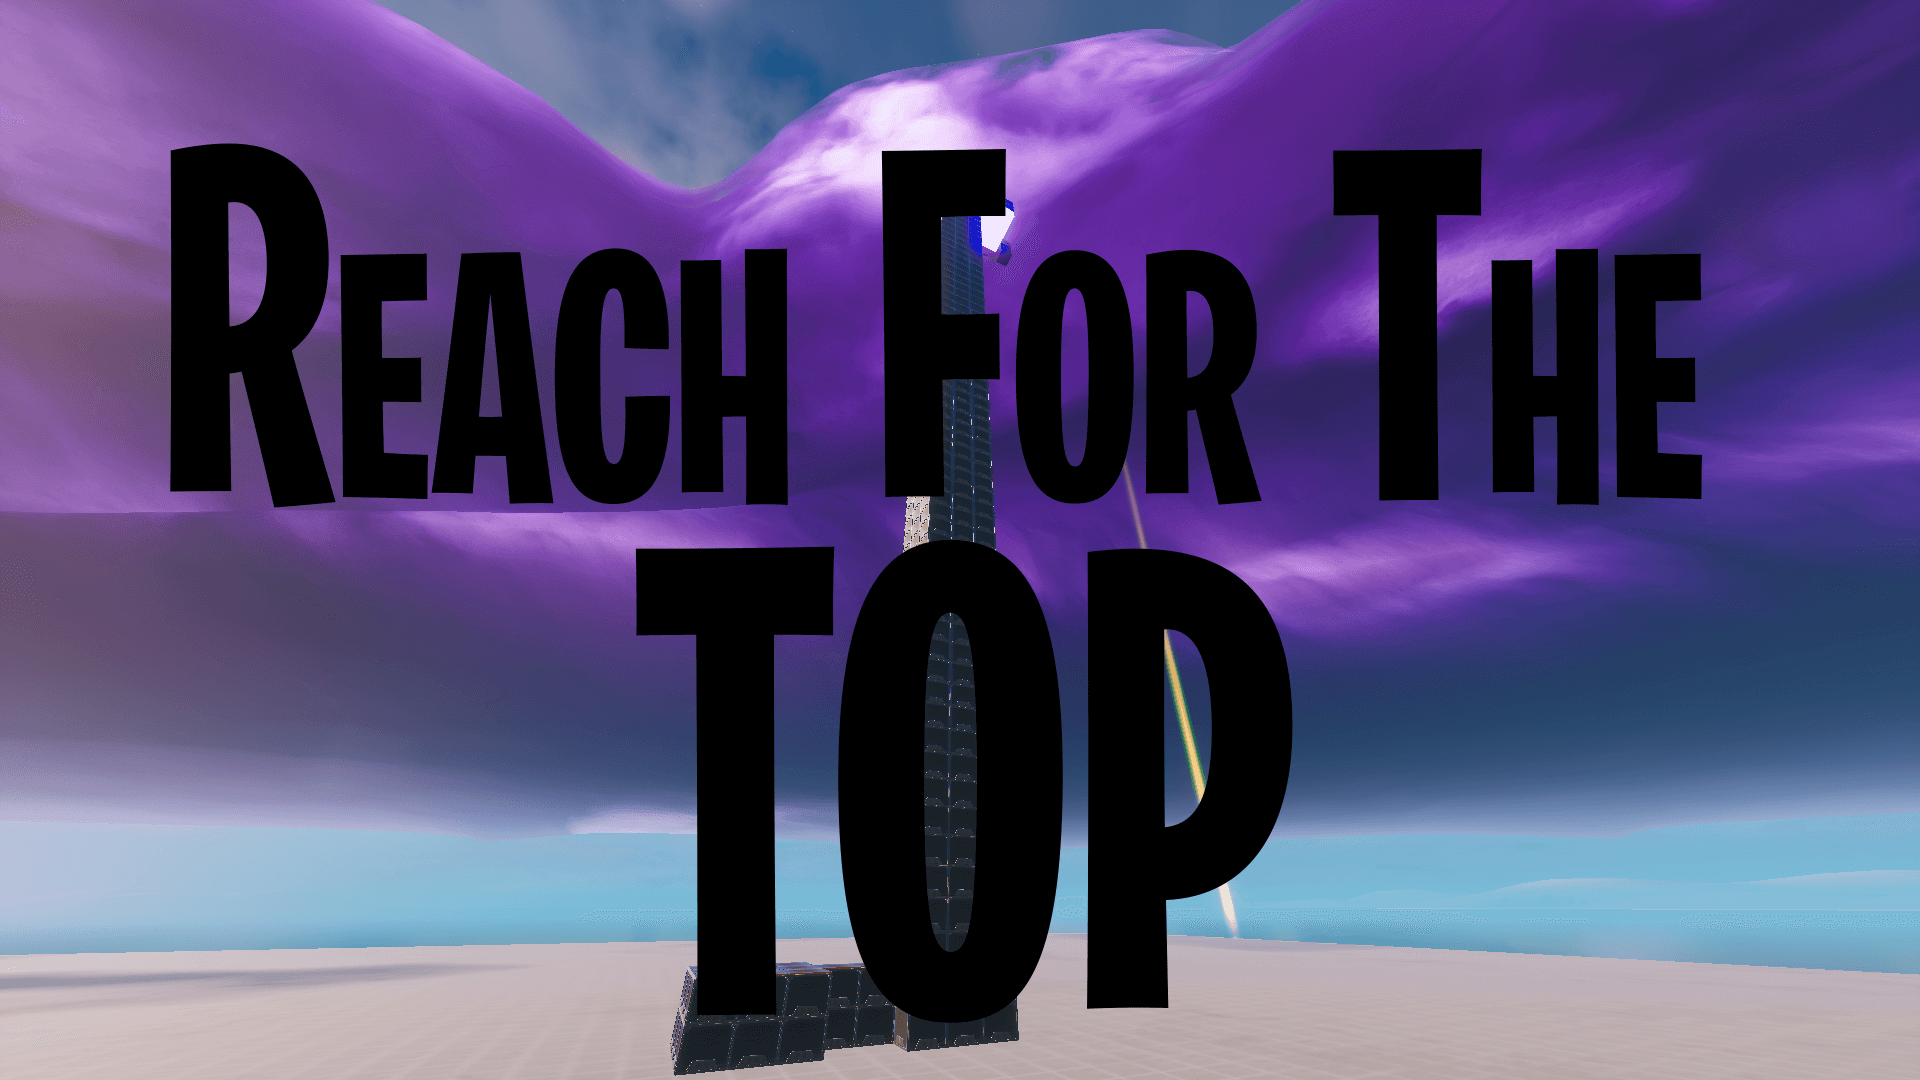 REACH FOR THE TOP